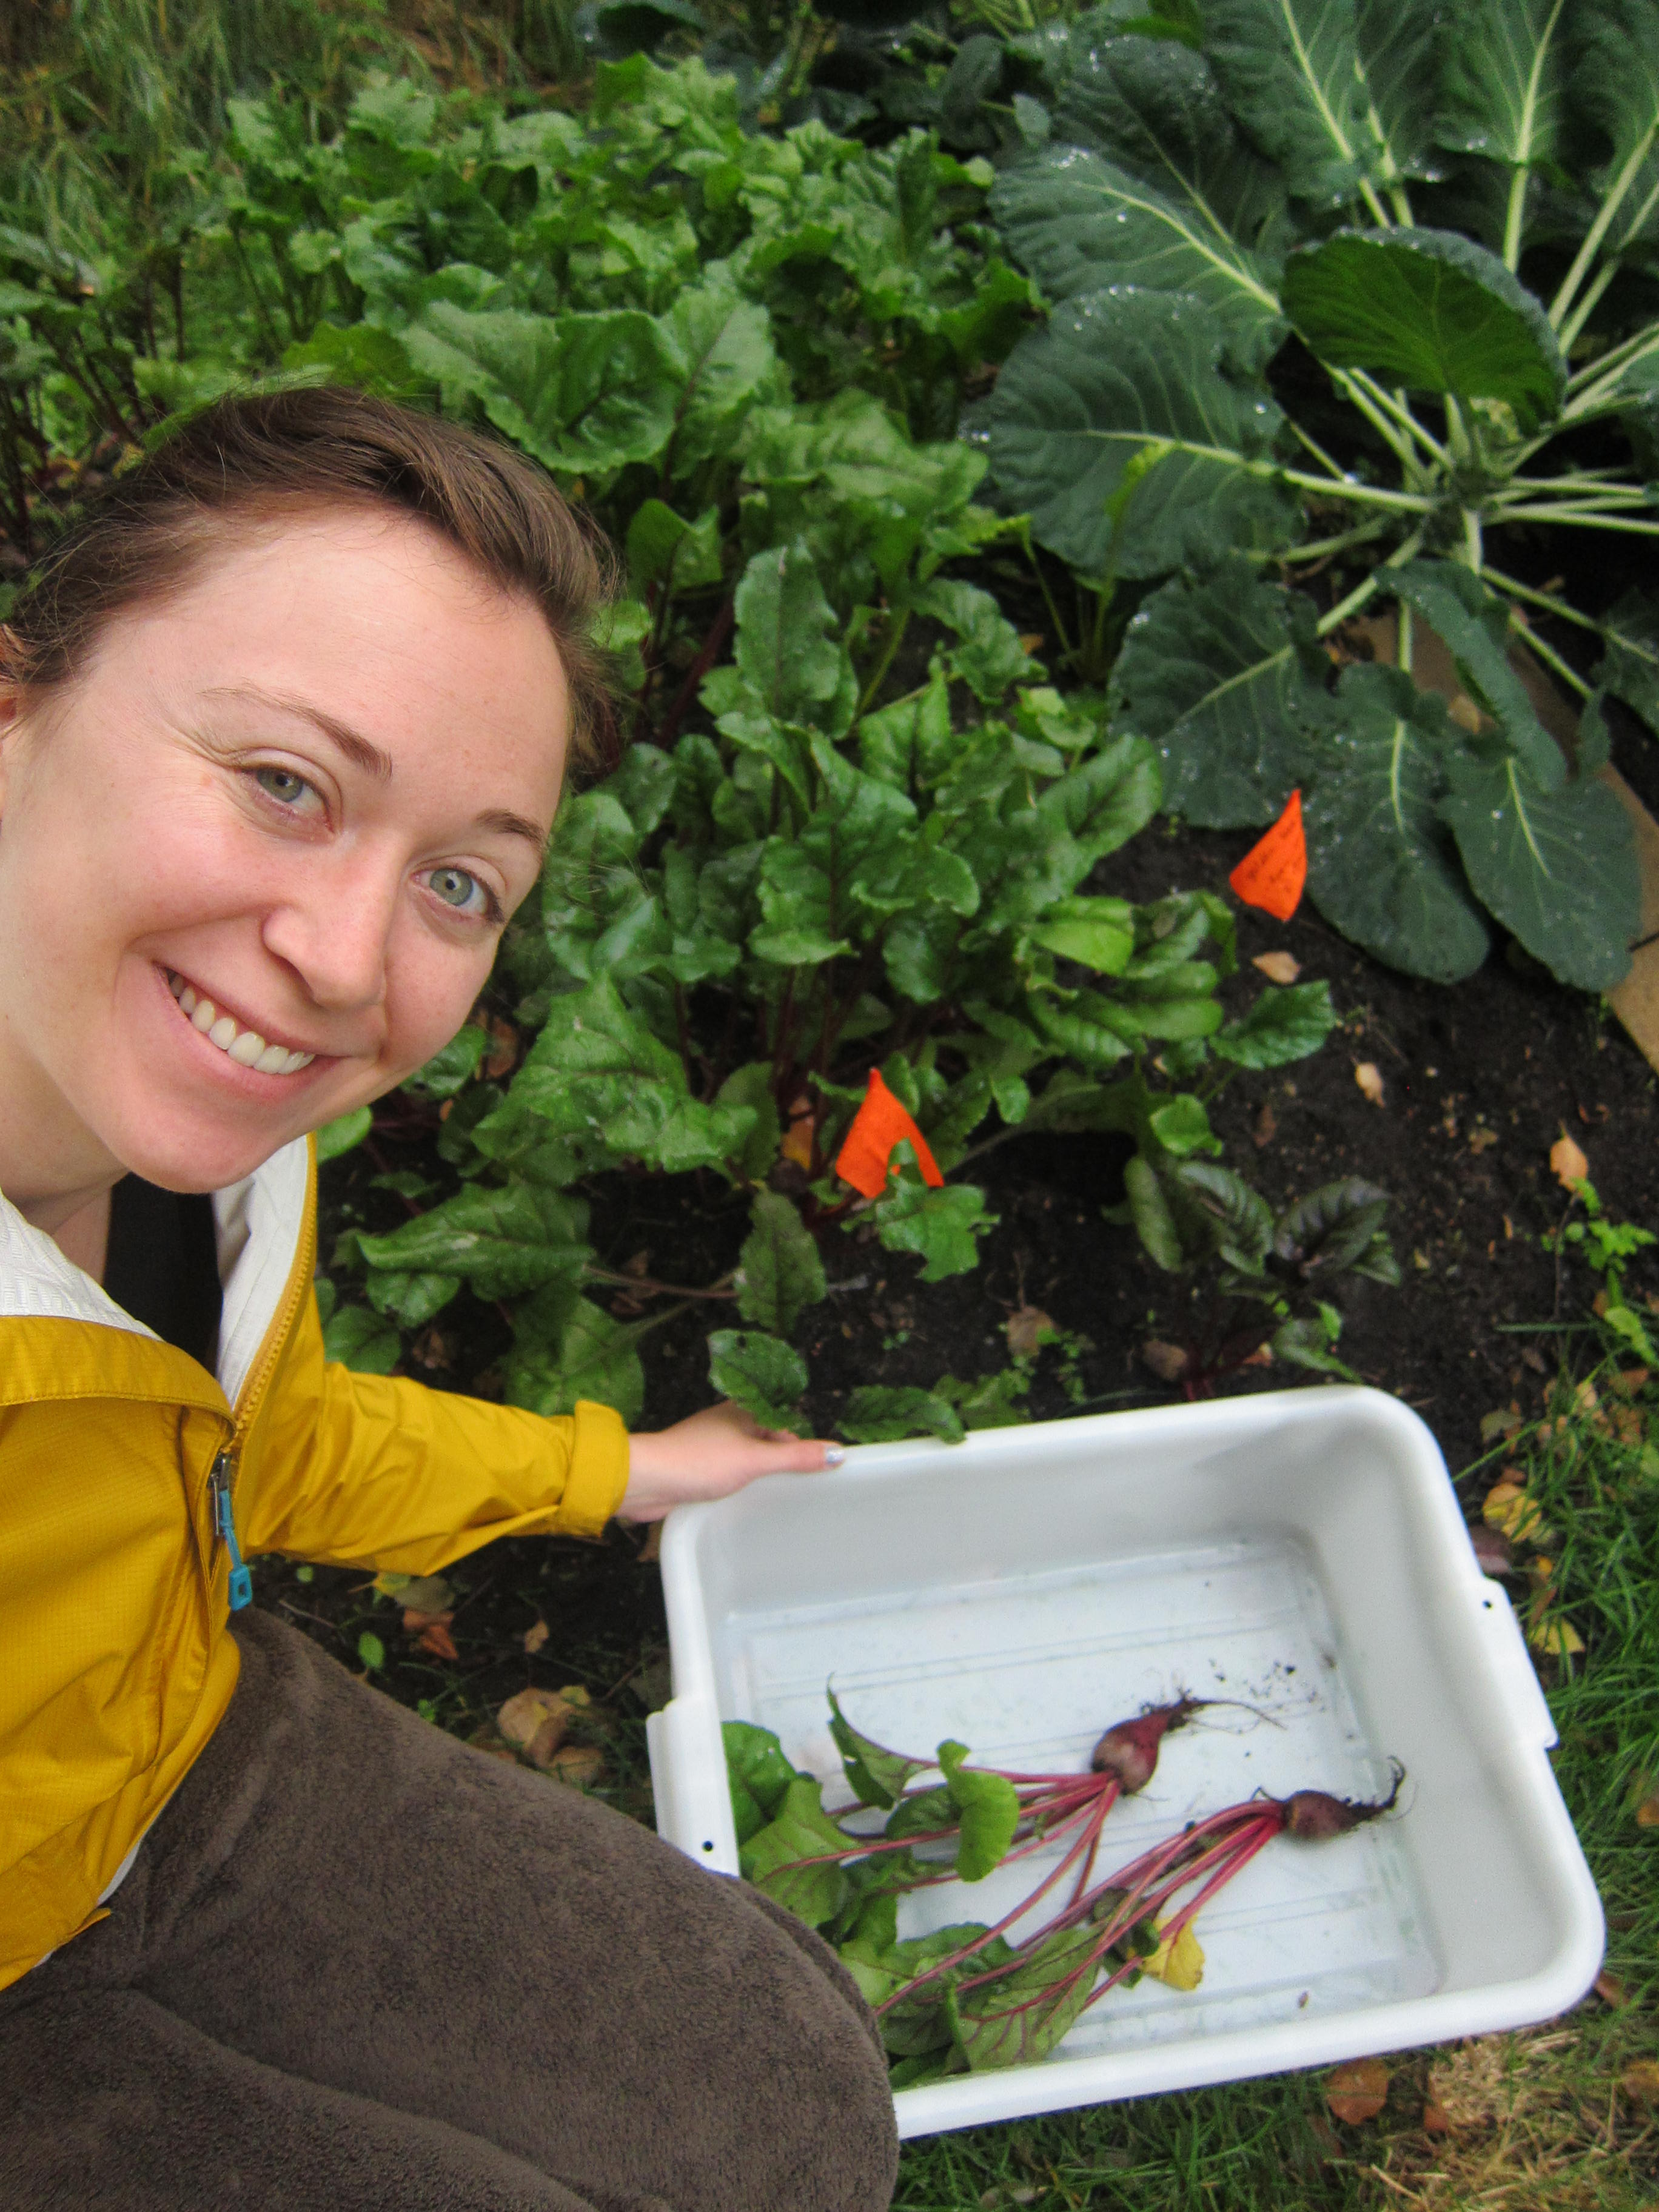 Ashley Taborsky harvesting beets from her garden